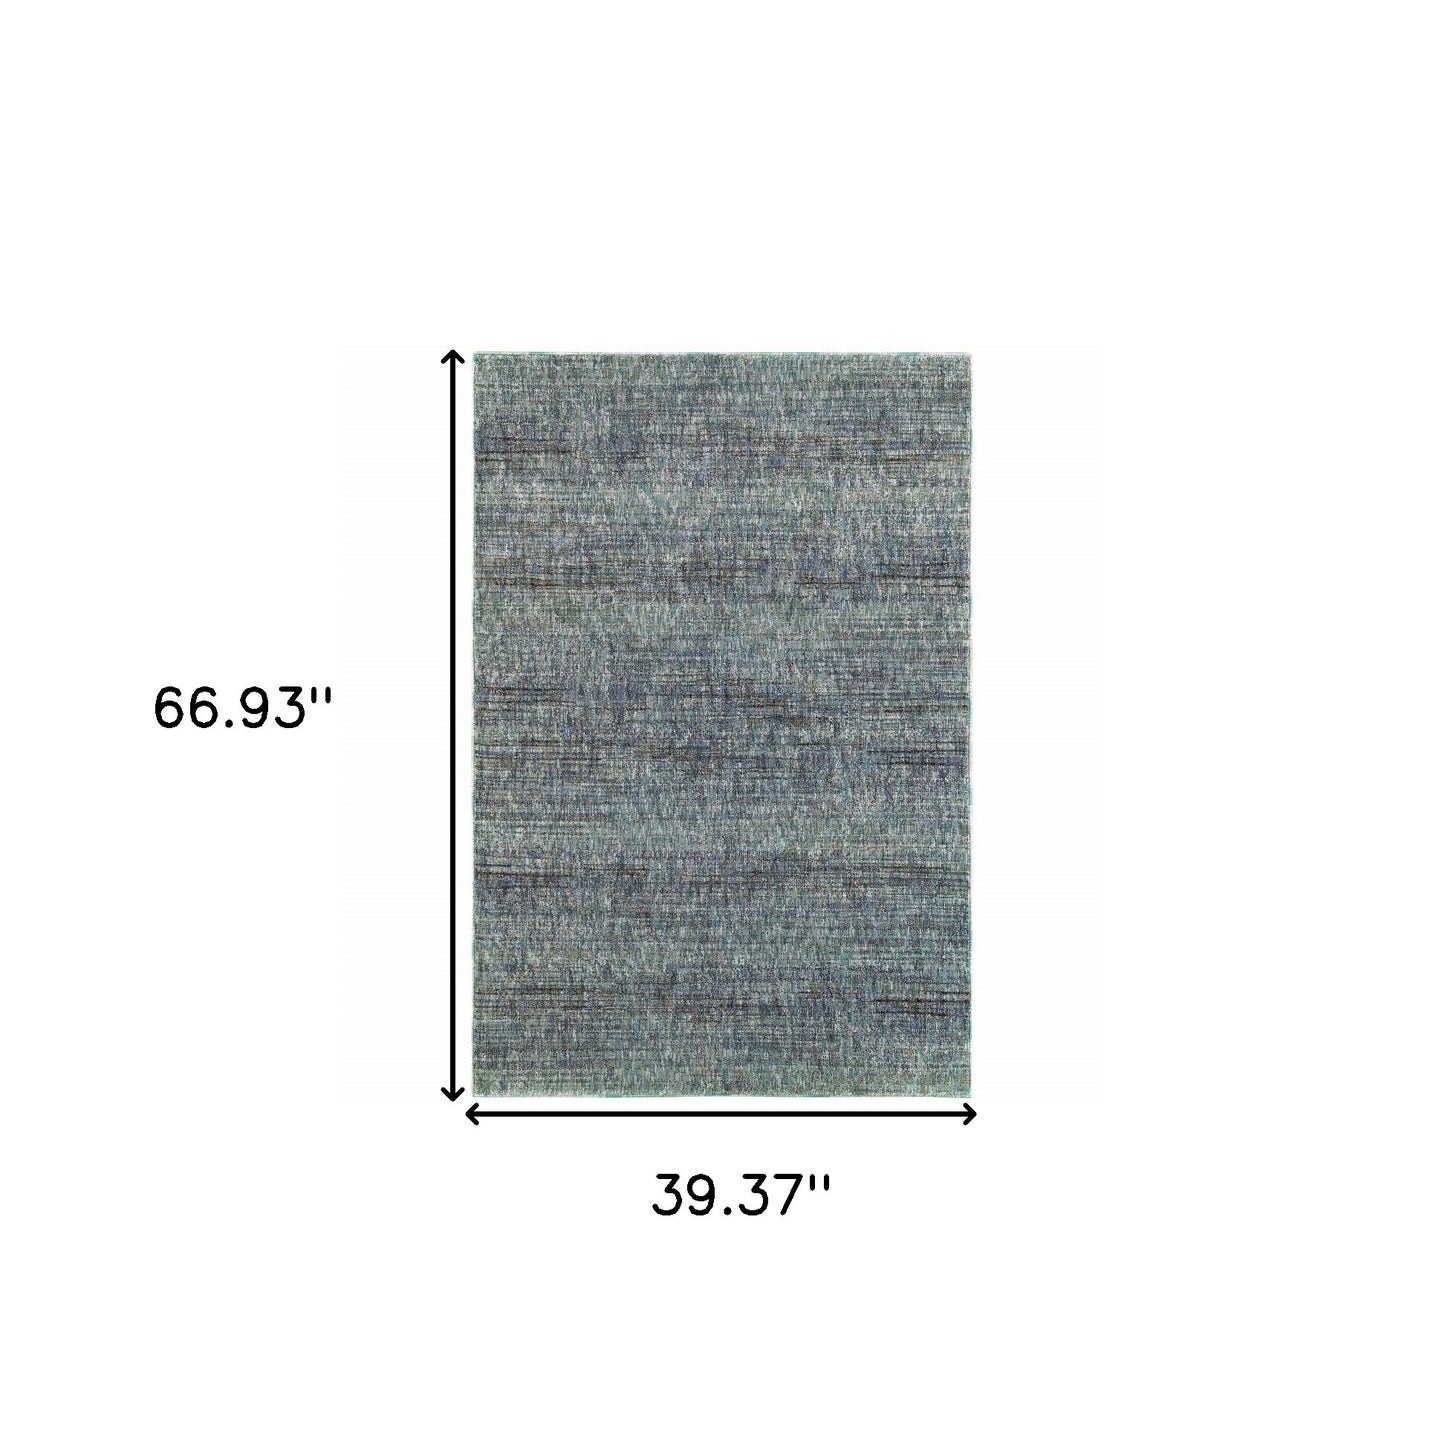 3' X 5' Blue and Gray Power Loom Area Rug